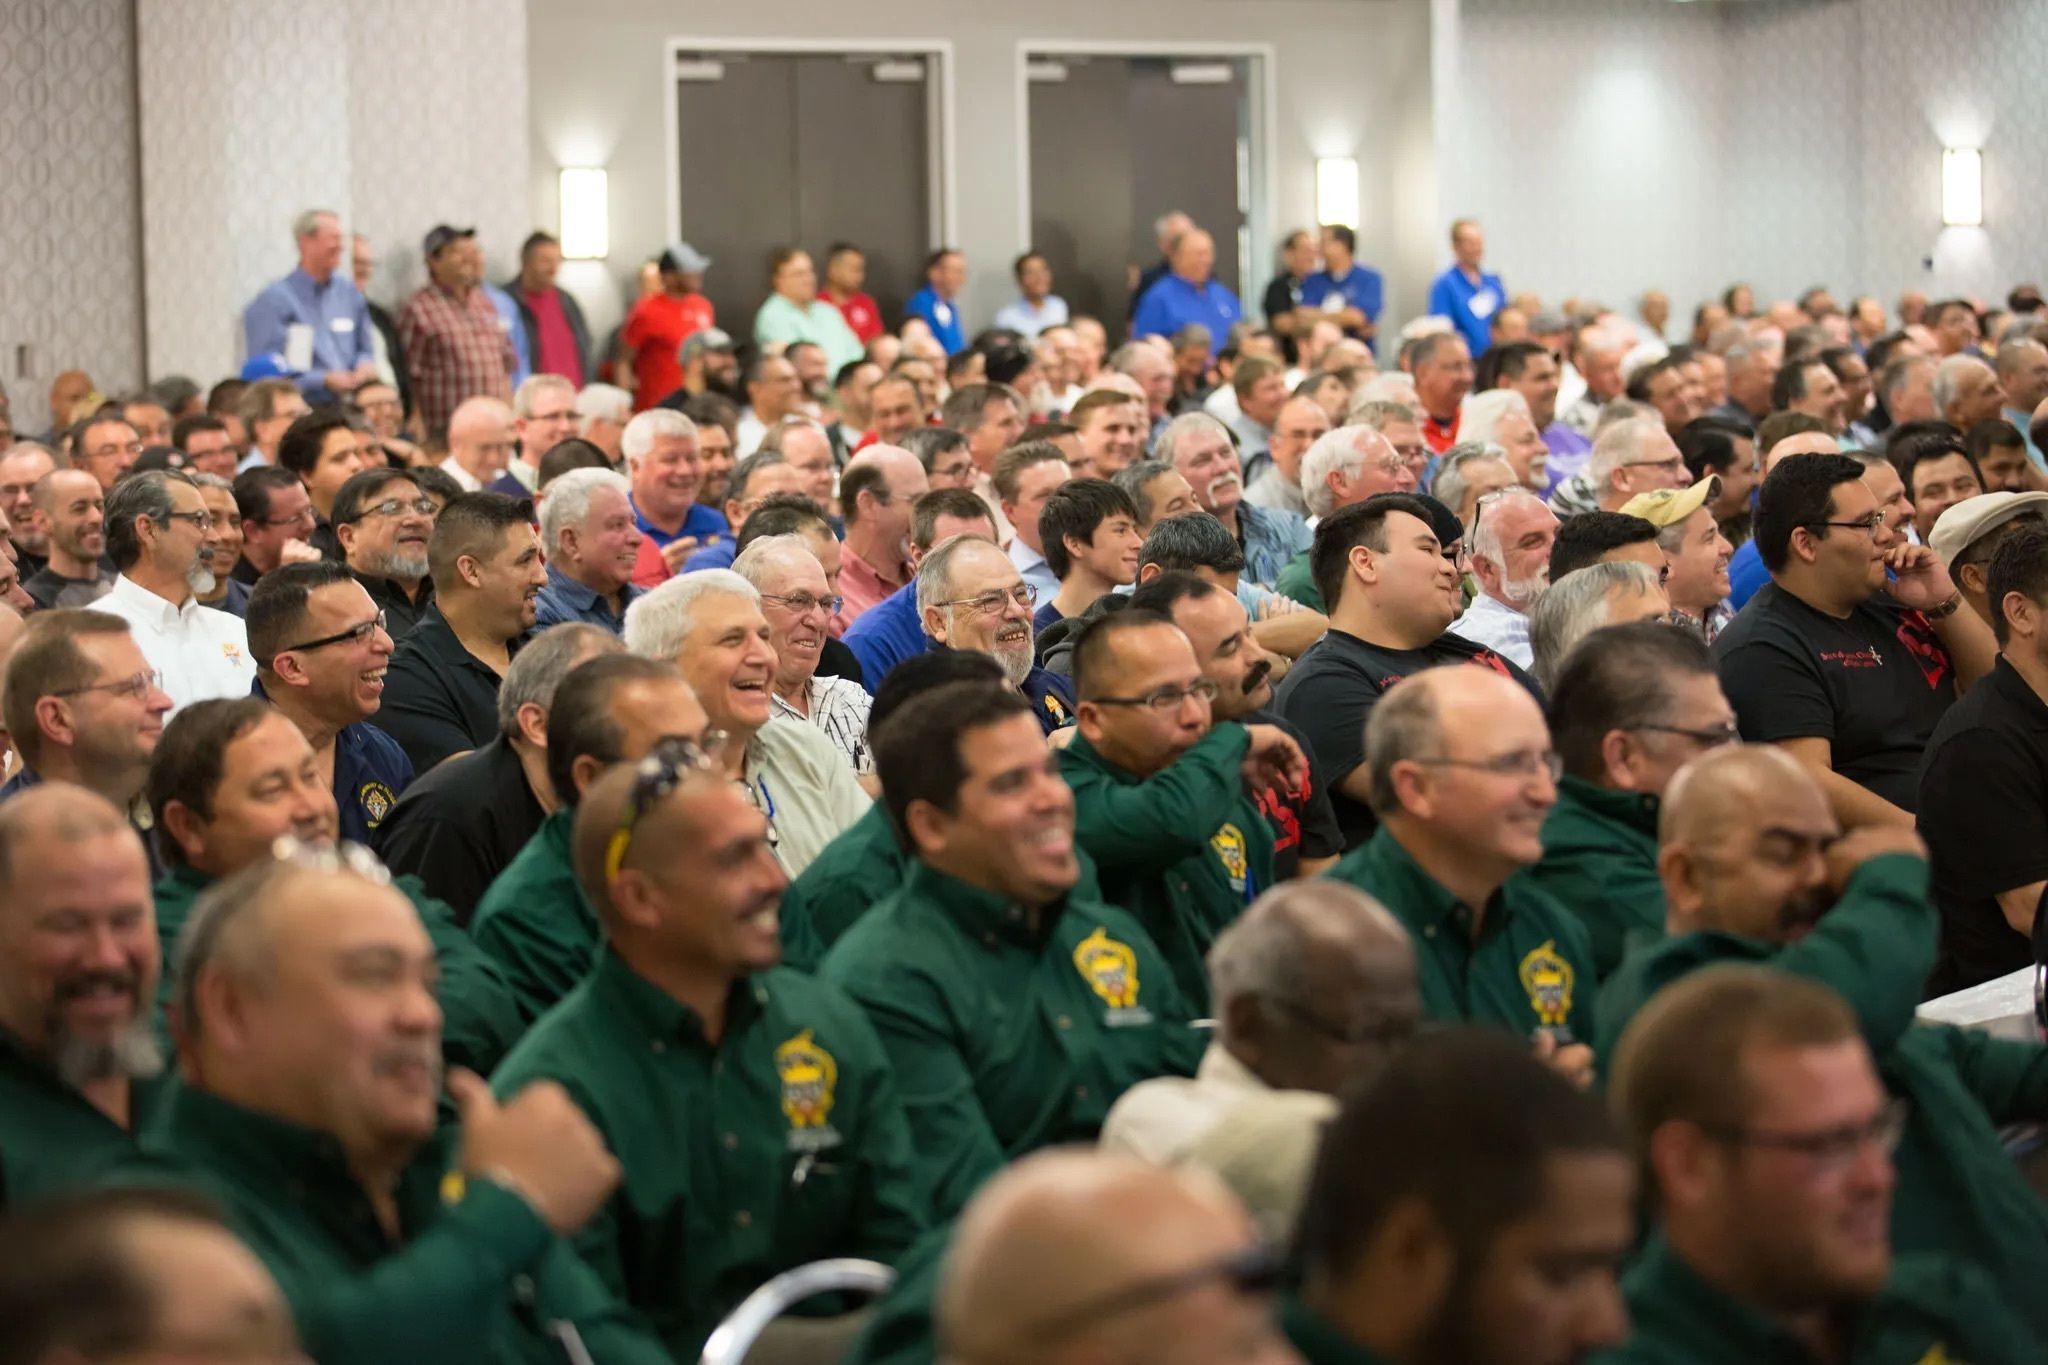 Learn More About Catholic Men's Conference